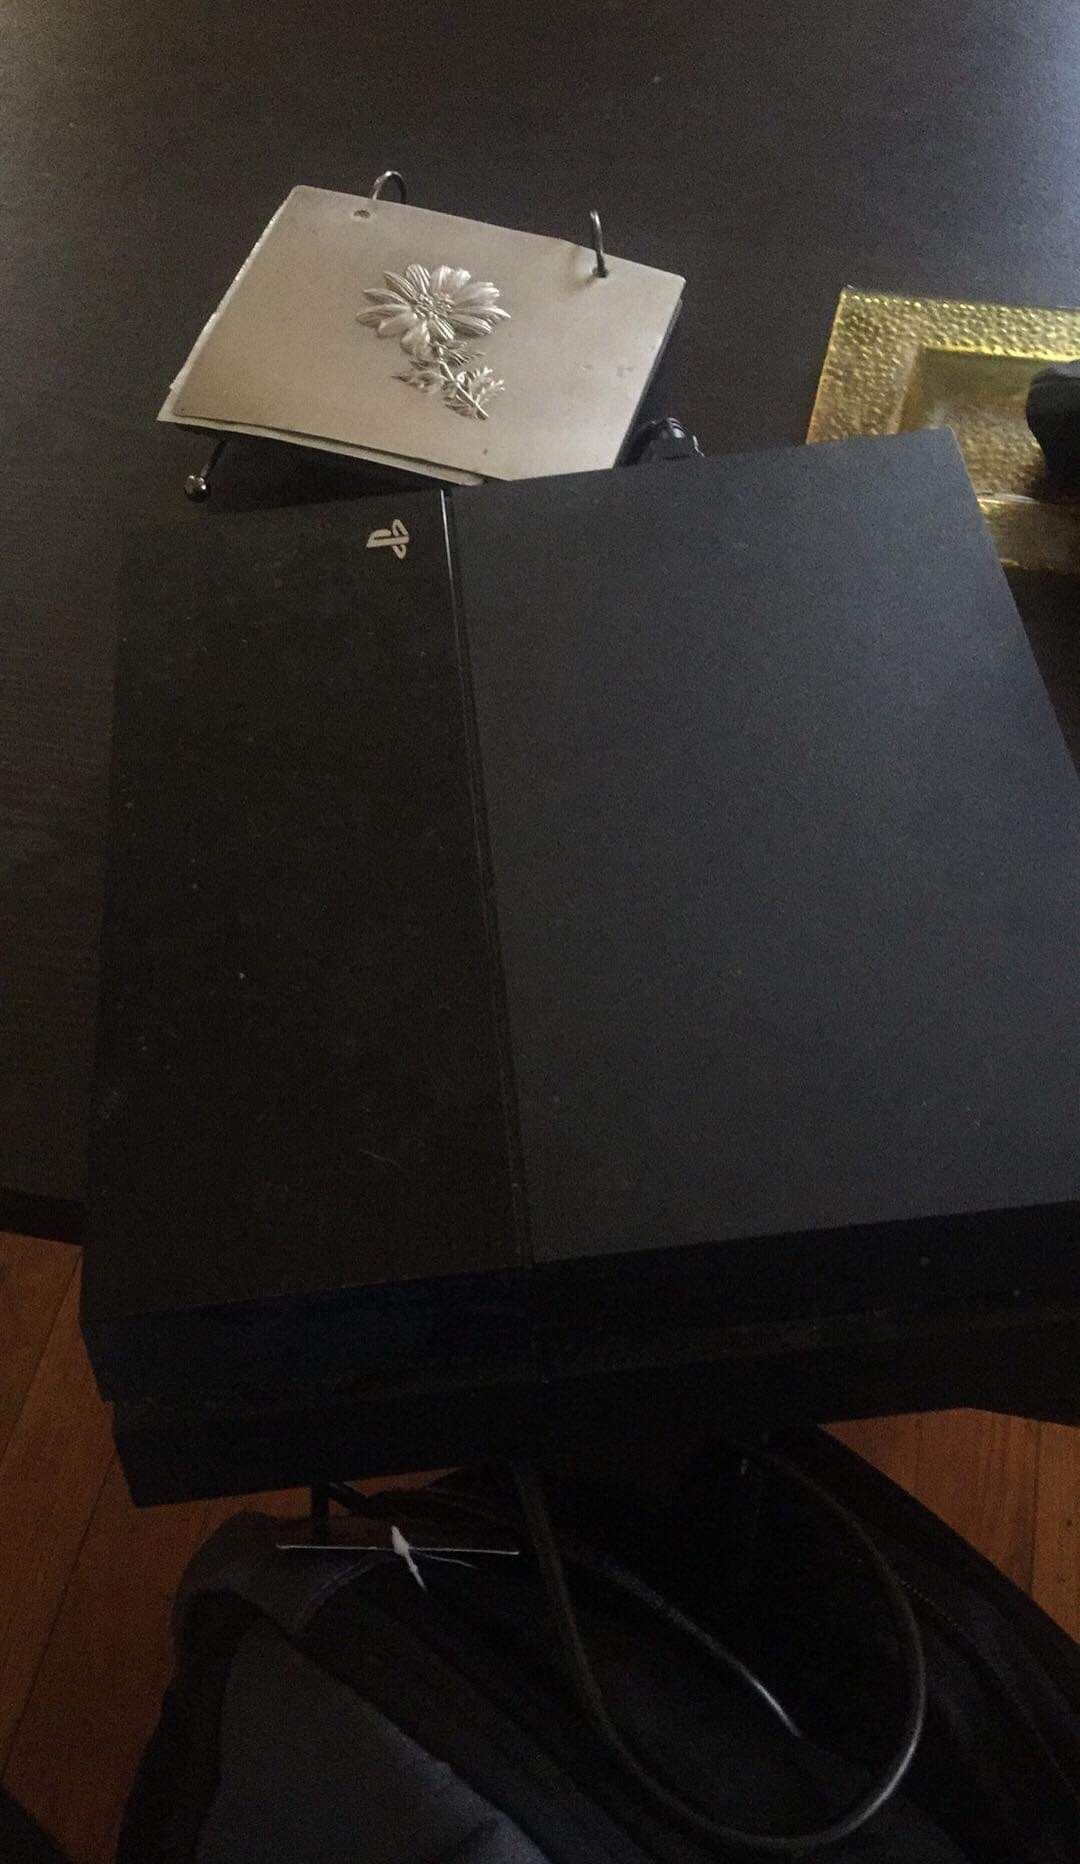 Ps4 like new